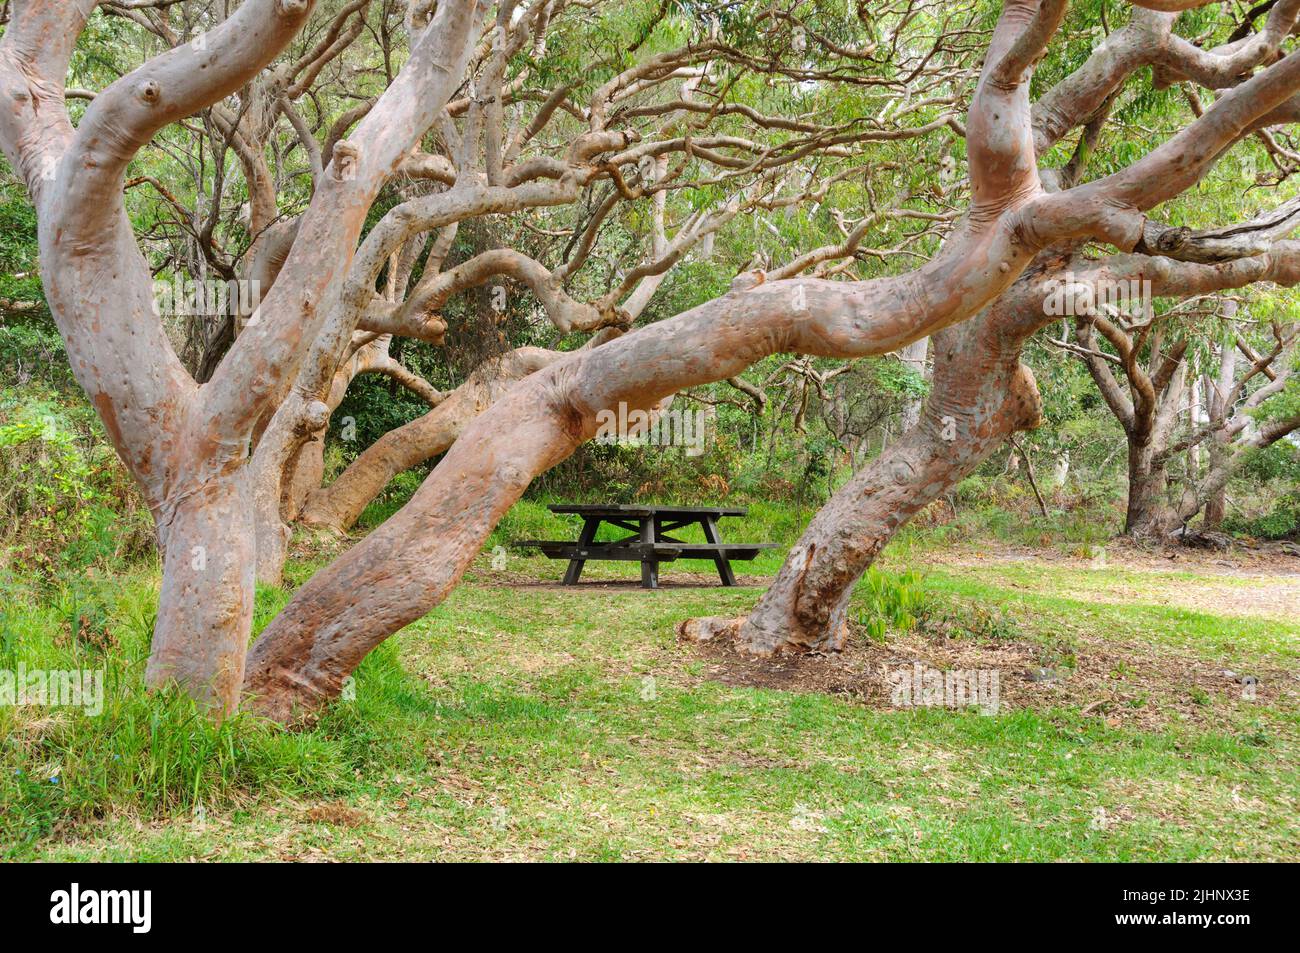 Wooden bench among twisted Snow gum trees - Shoal Bay, NSW, Australia Stock Photo